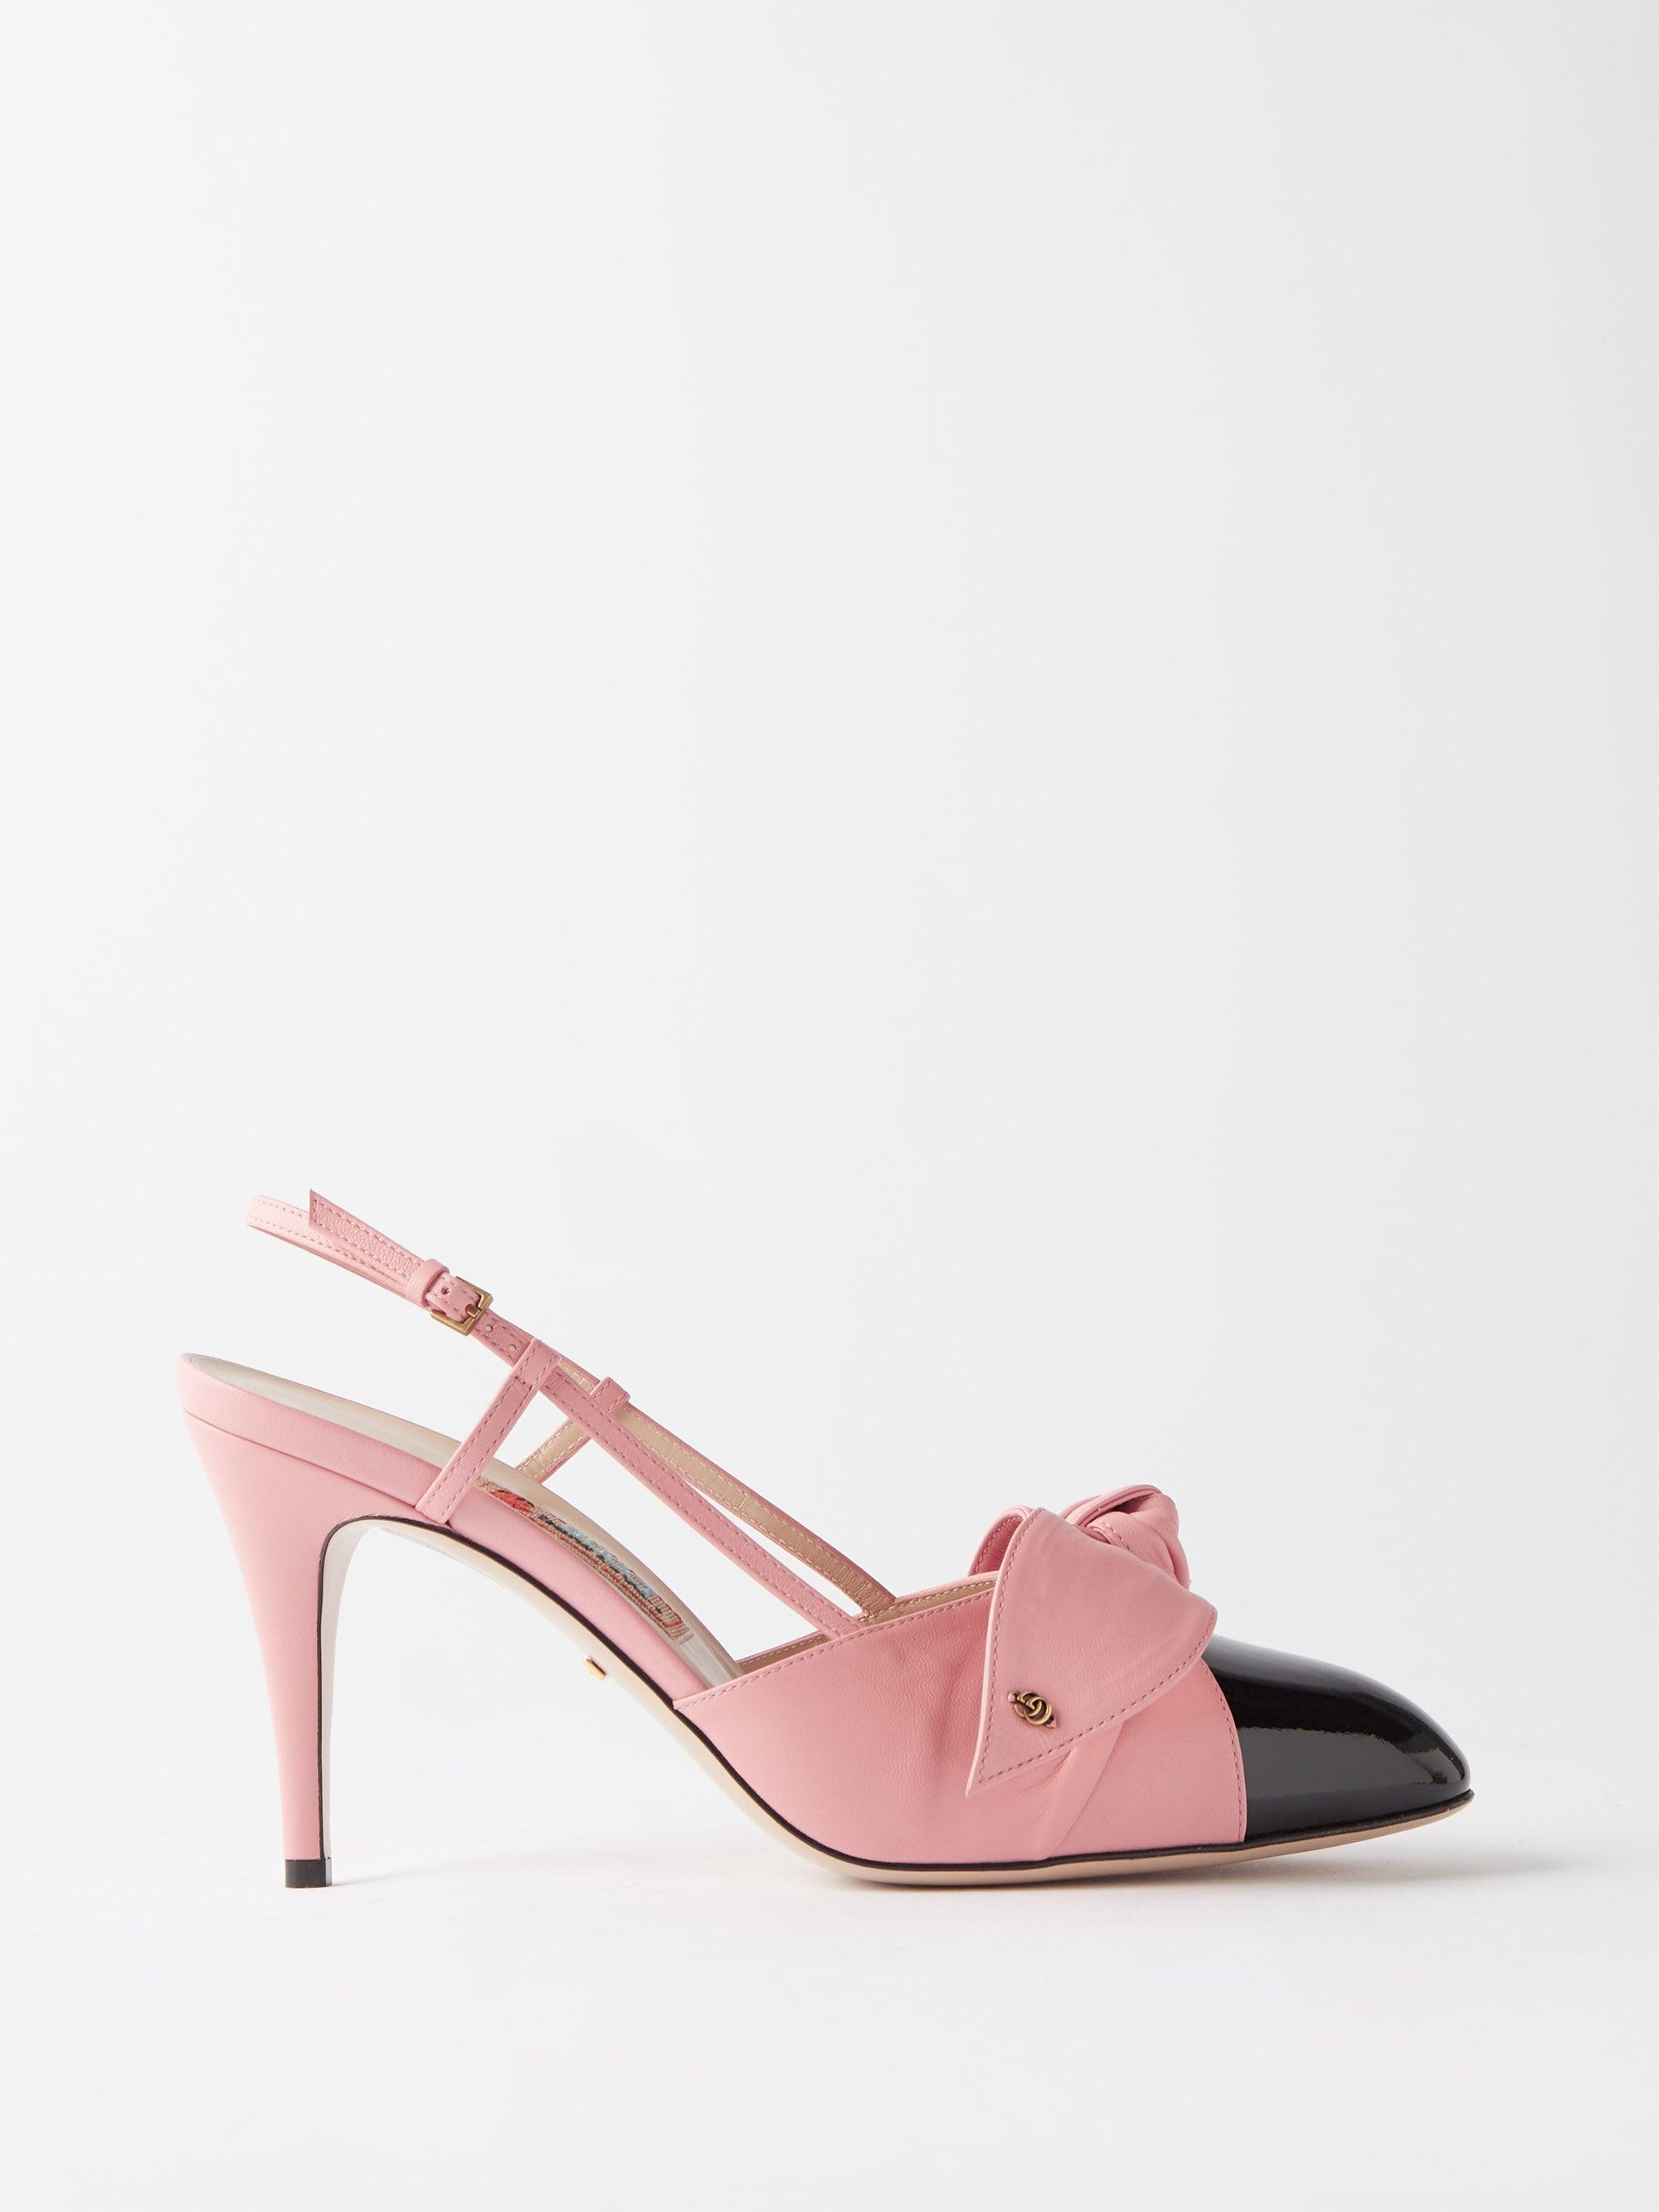 Gucci Agata Bow Patent-toe Leather Slingback Pumps in Pink | Lyst